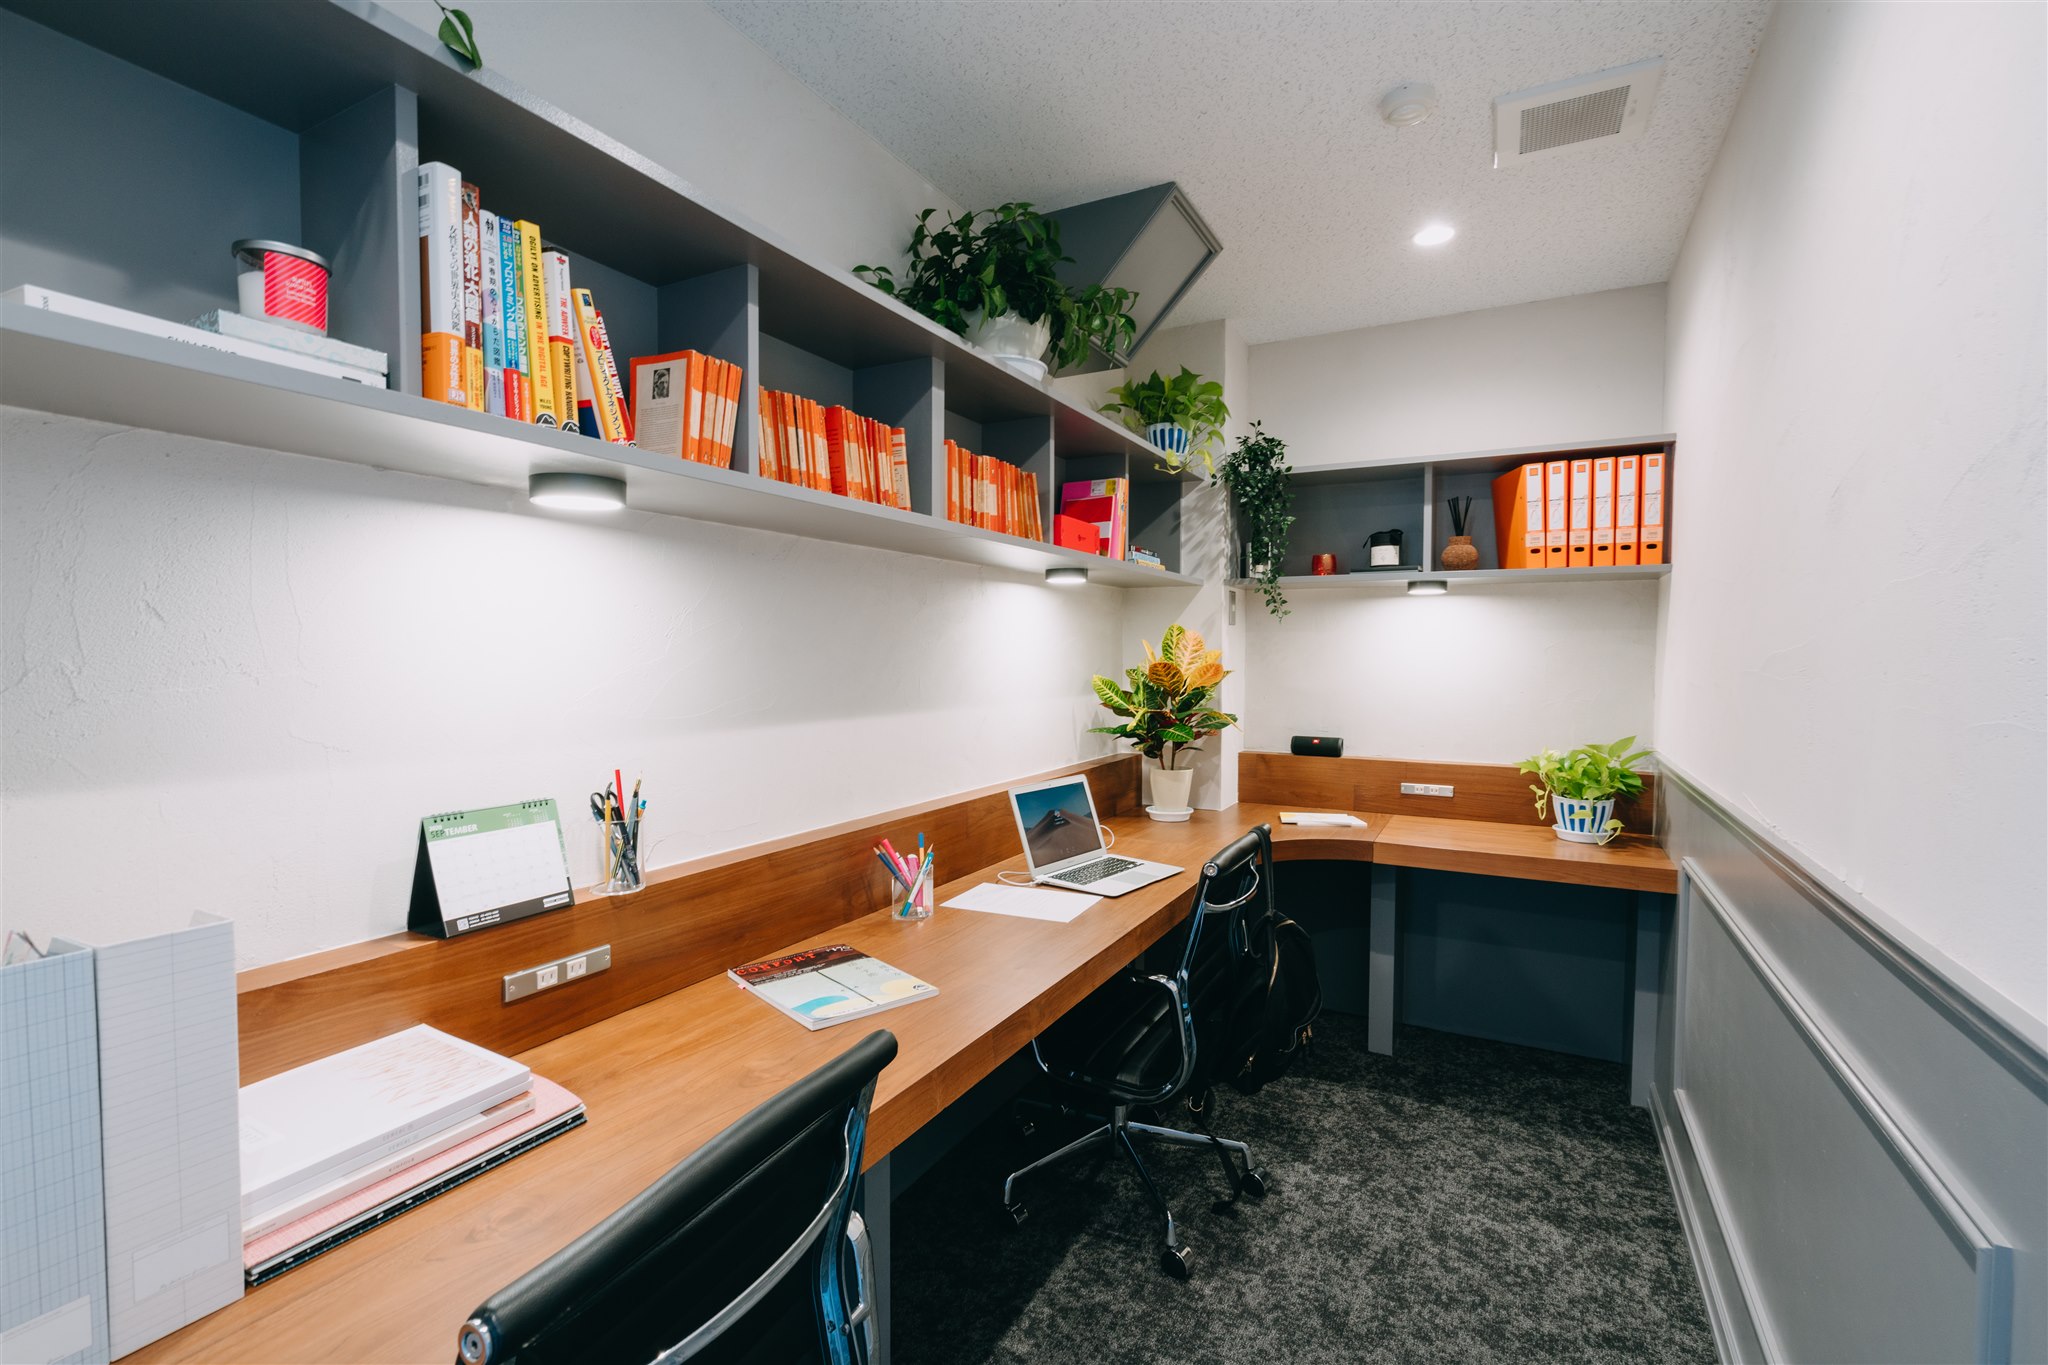 Private Offices are Available at Both RYOZAN PARK Grand & Otsuka